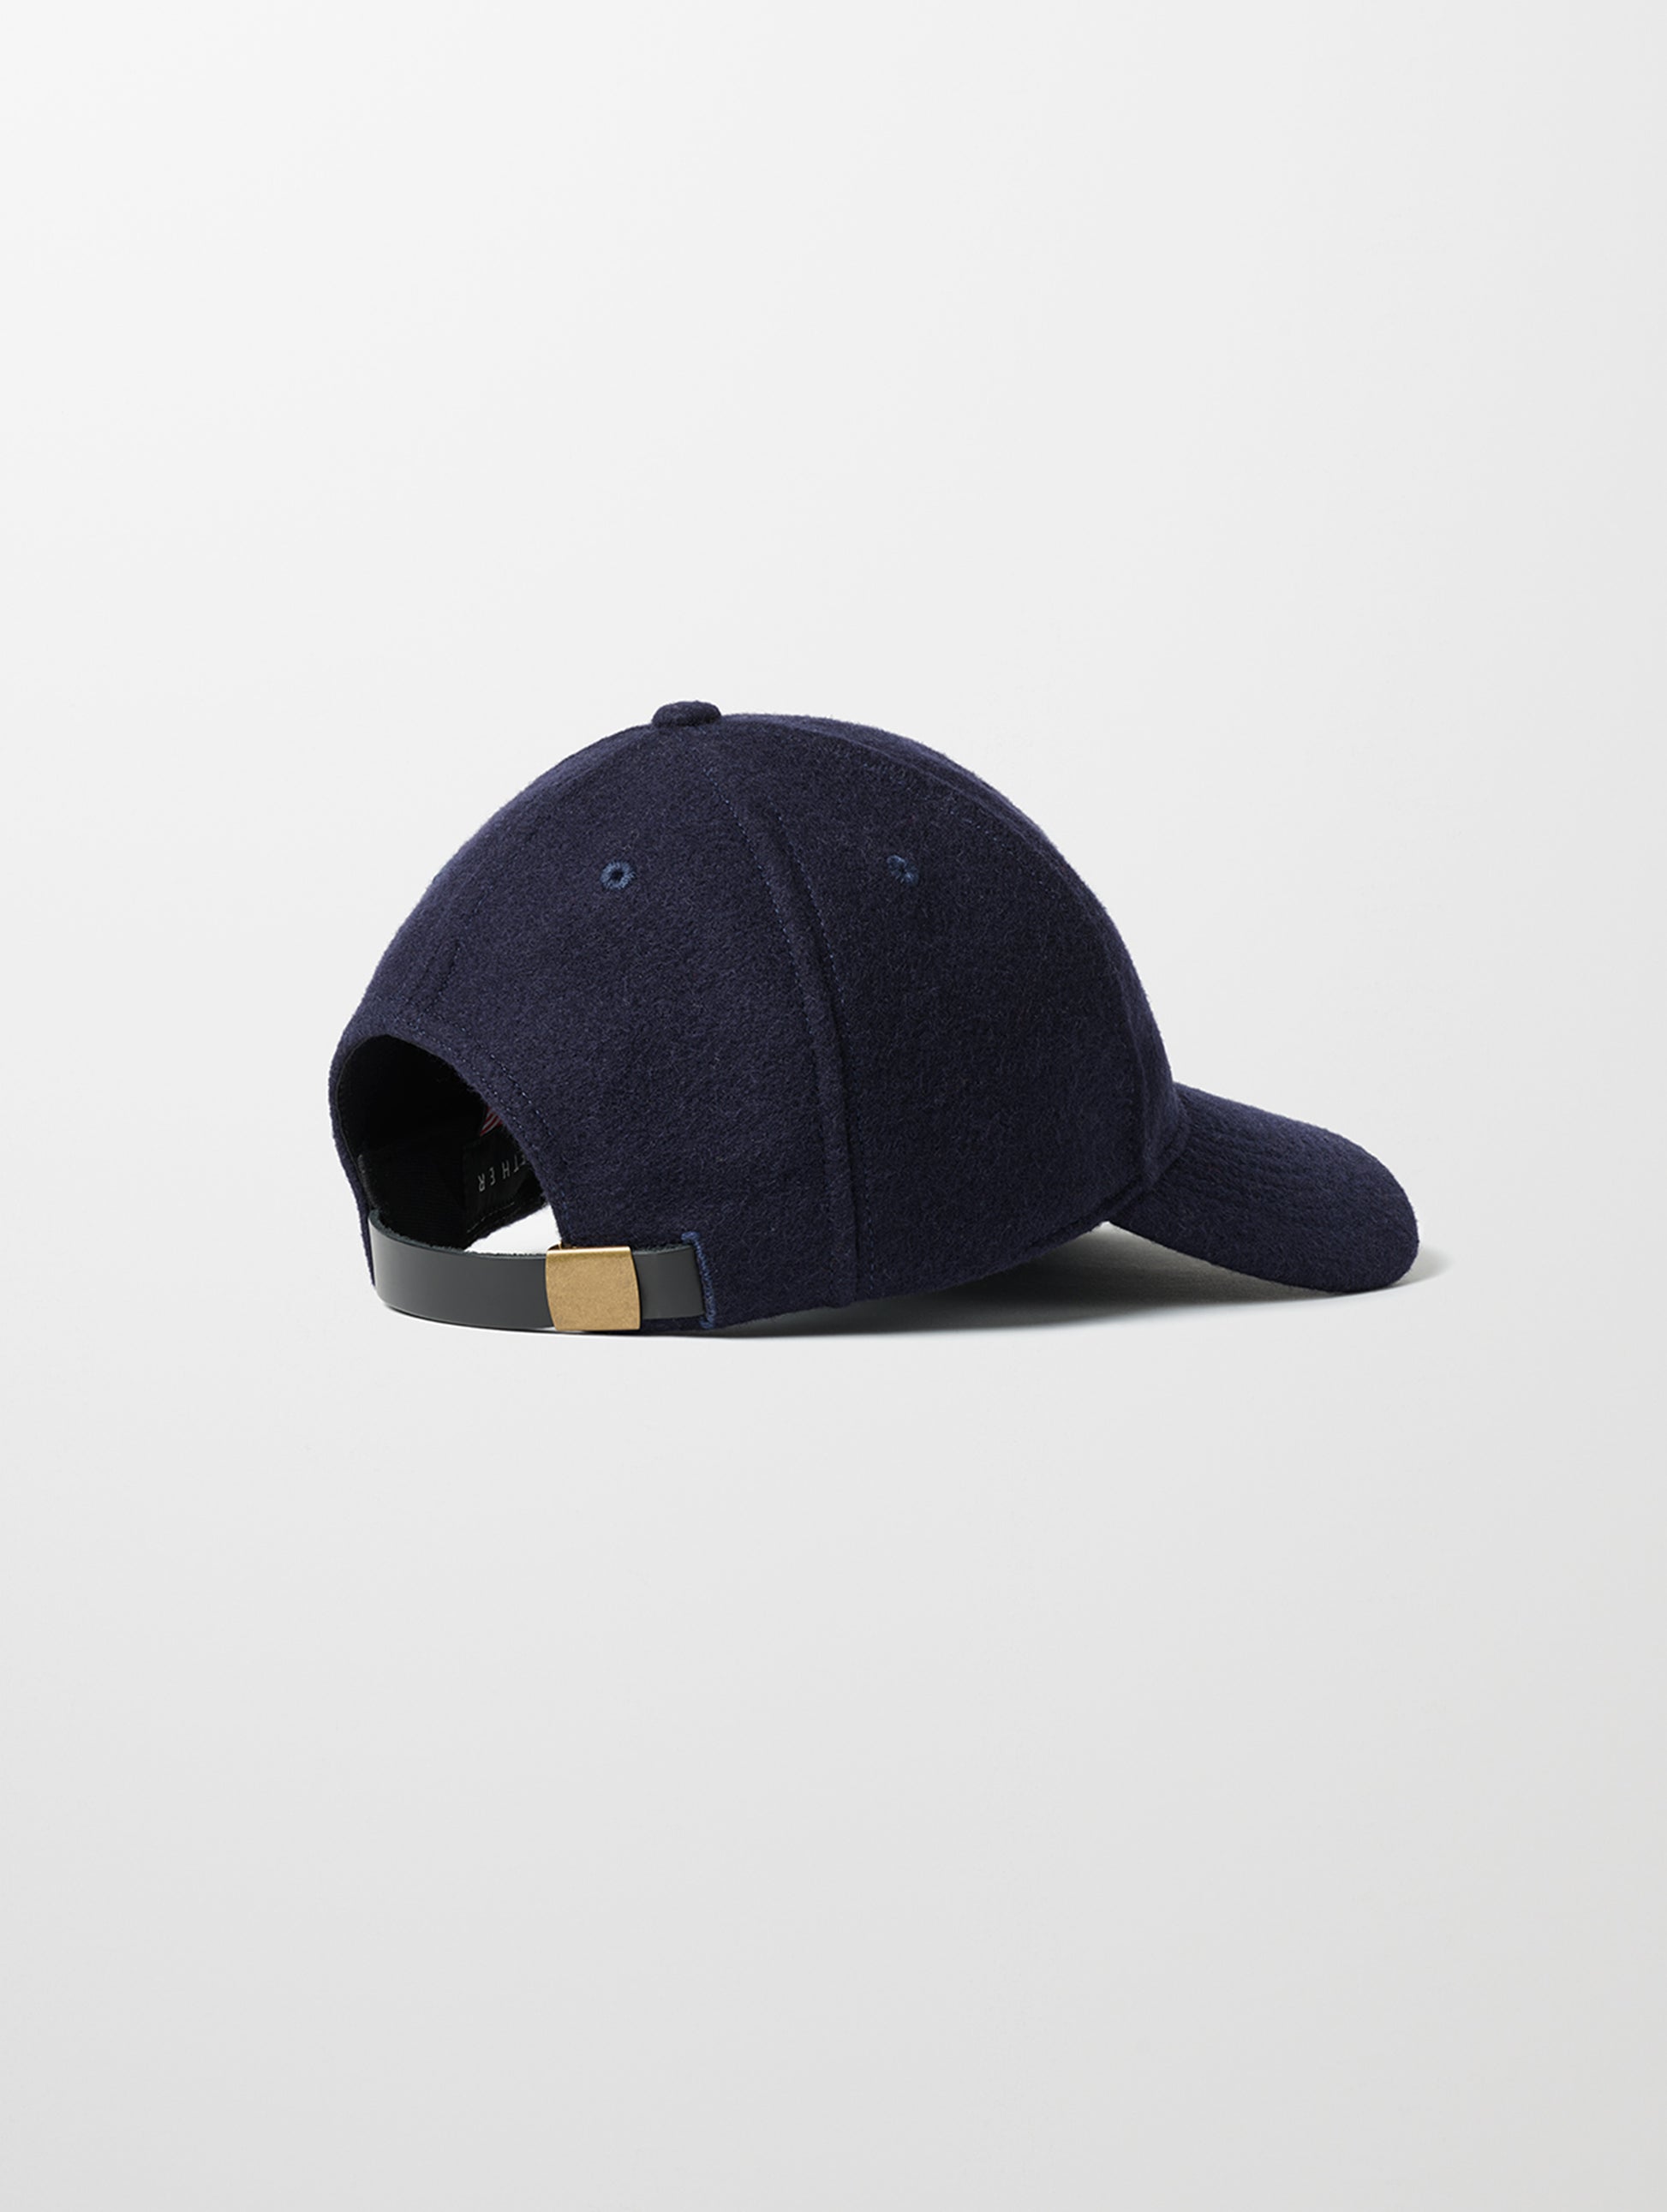 Blue wool hat from AETHER Apparel